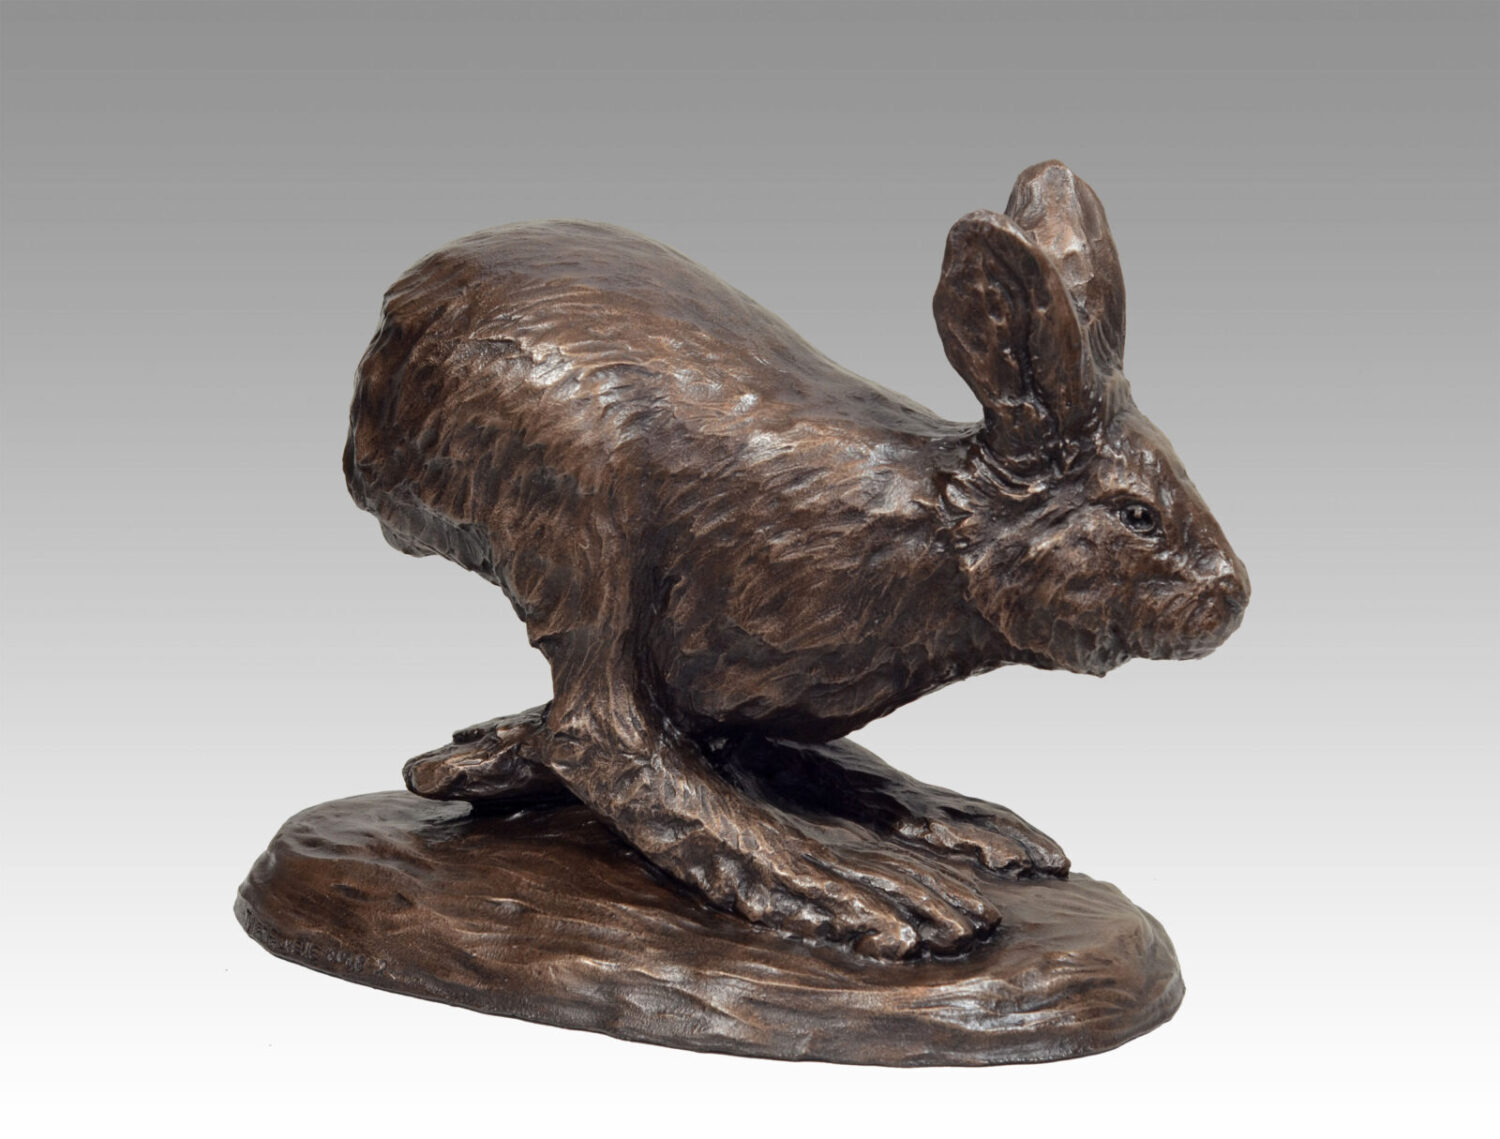 Gallery, Snowshoe Dash, $500 CAD, Metal Infused (Interior/Exterior), 16” L x 12” H, Edition 60, Wildlife Sculpture of a snowshoe hare, Sculptor Tyler Fauvelle